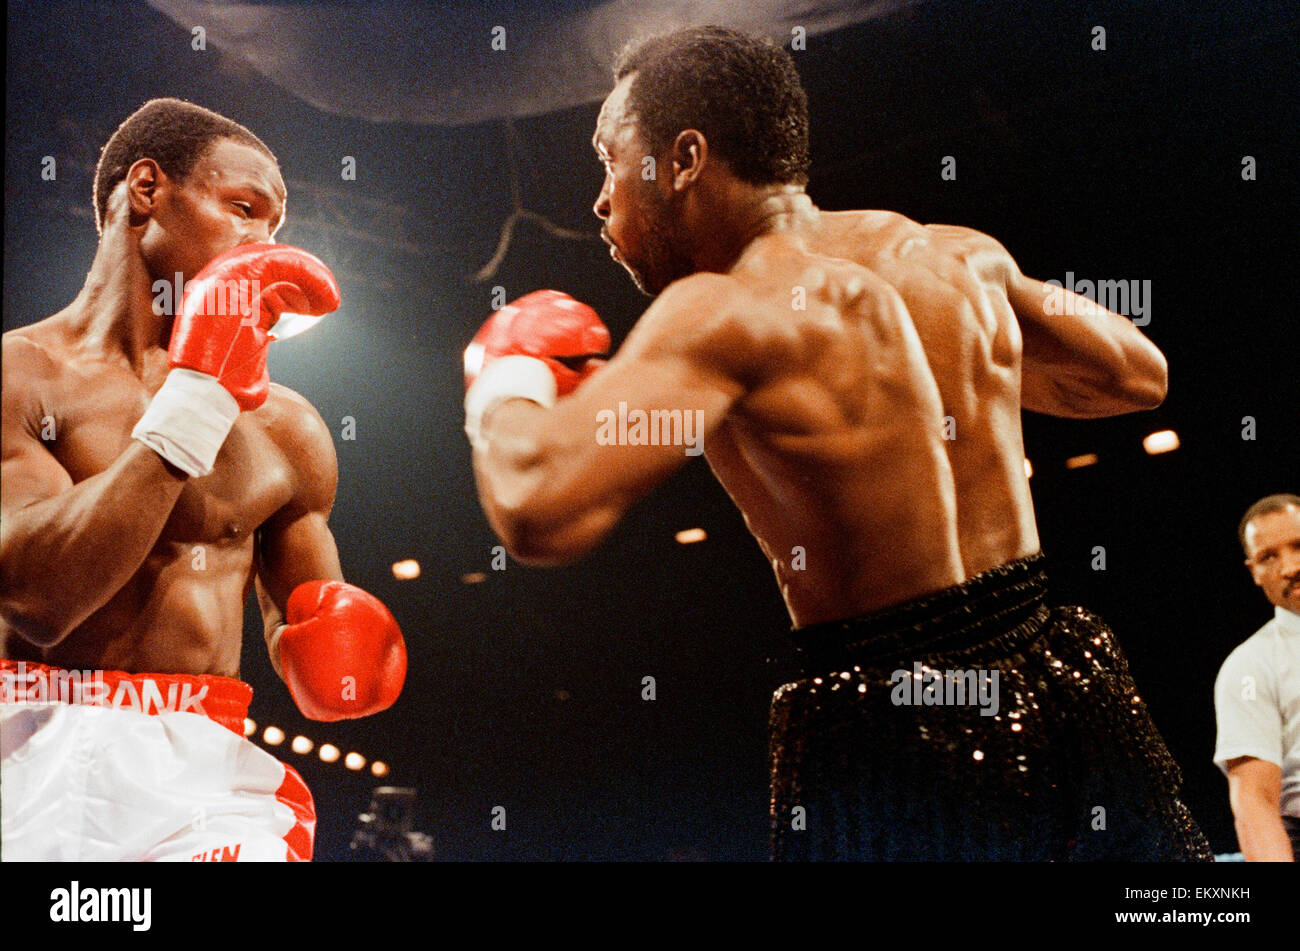 Action from the Chris Eubank v Nigel Benn fight at the NEC in Birmingham. 18th November 1990 Stock Photo